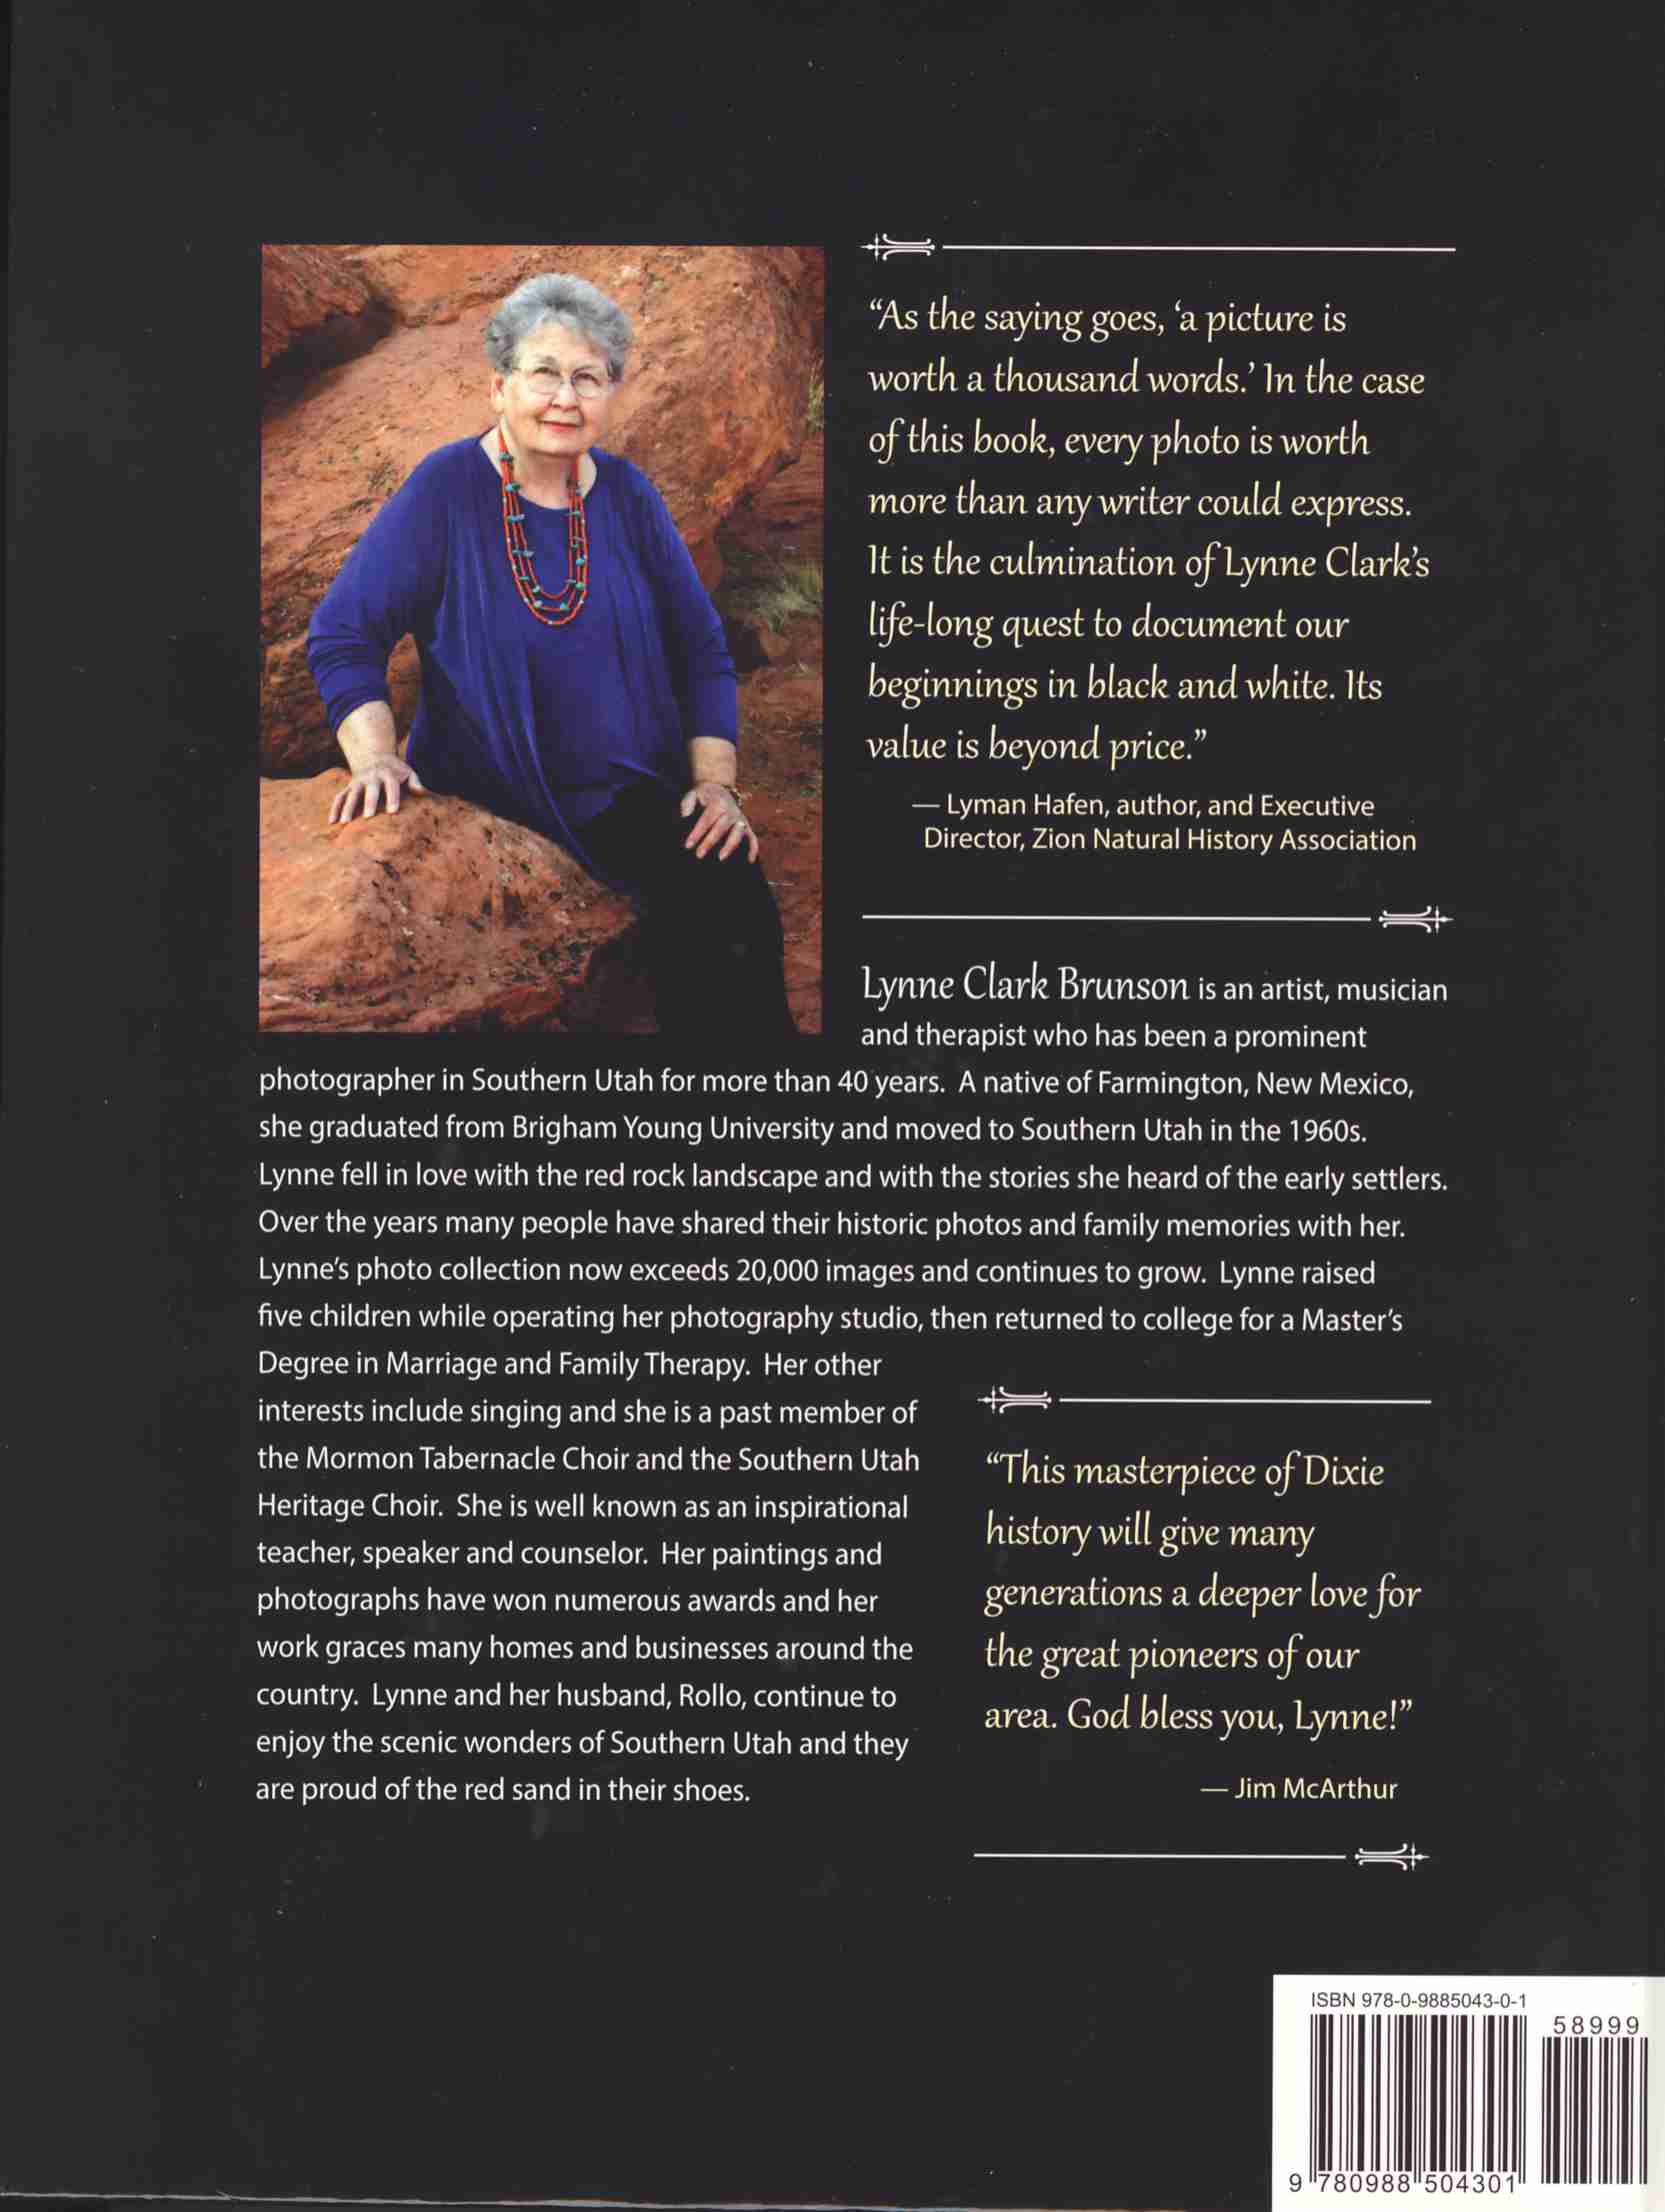 Back cover of Images of Faith: A Pictorial History of St. George, Utah